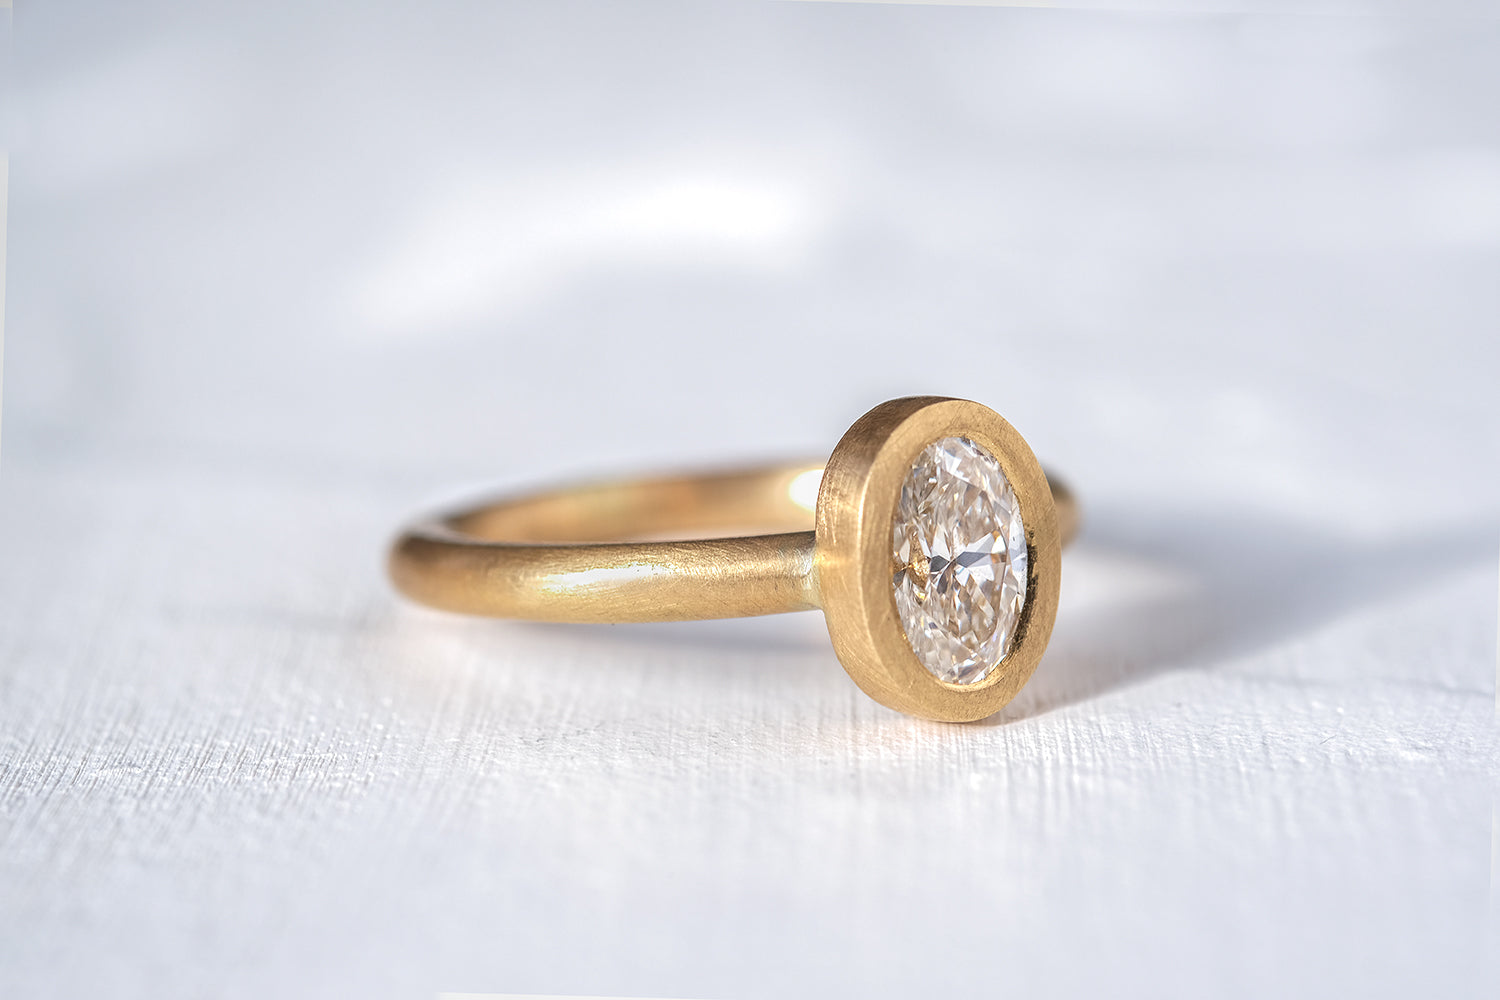 Gold Engagement Ring Set With An Oval Cut Diamond